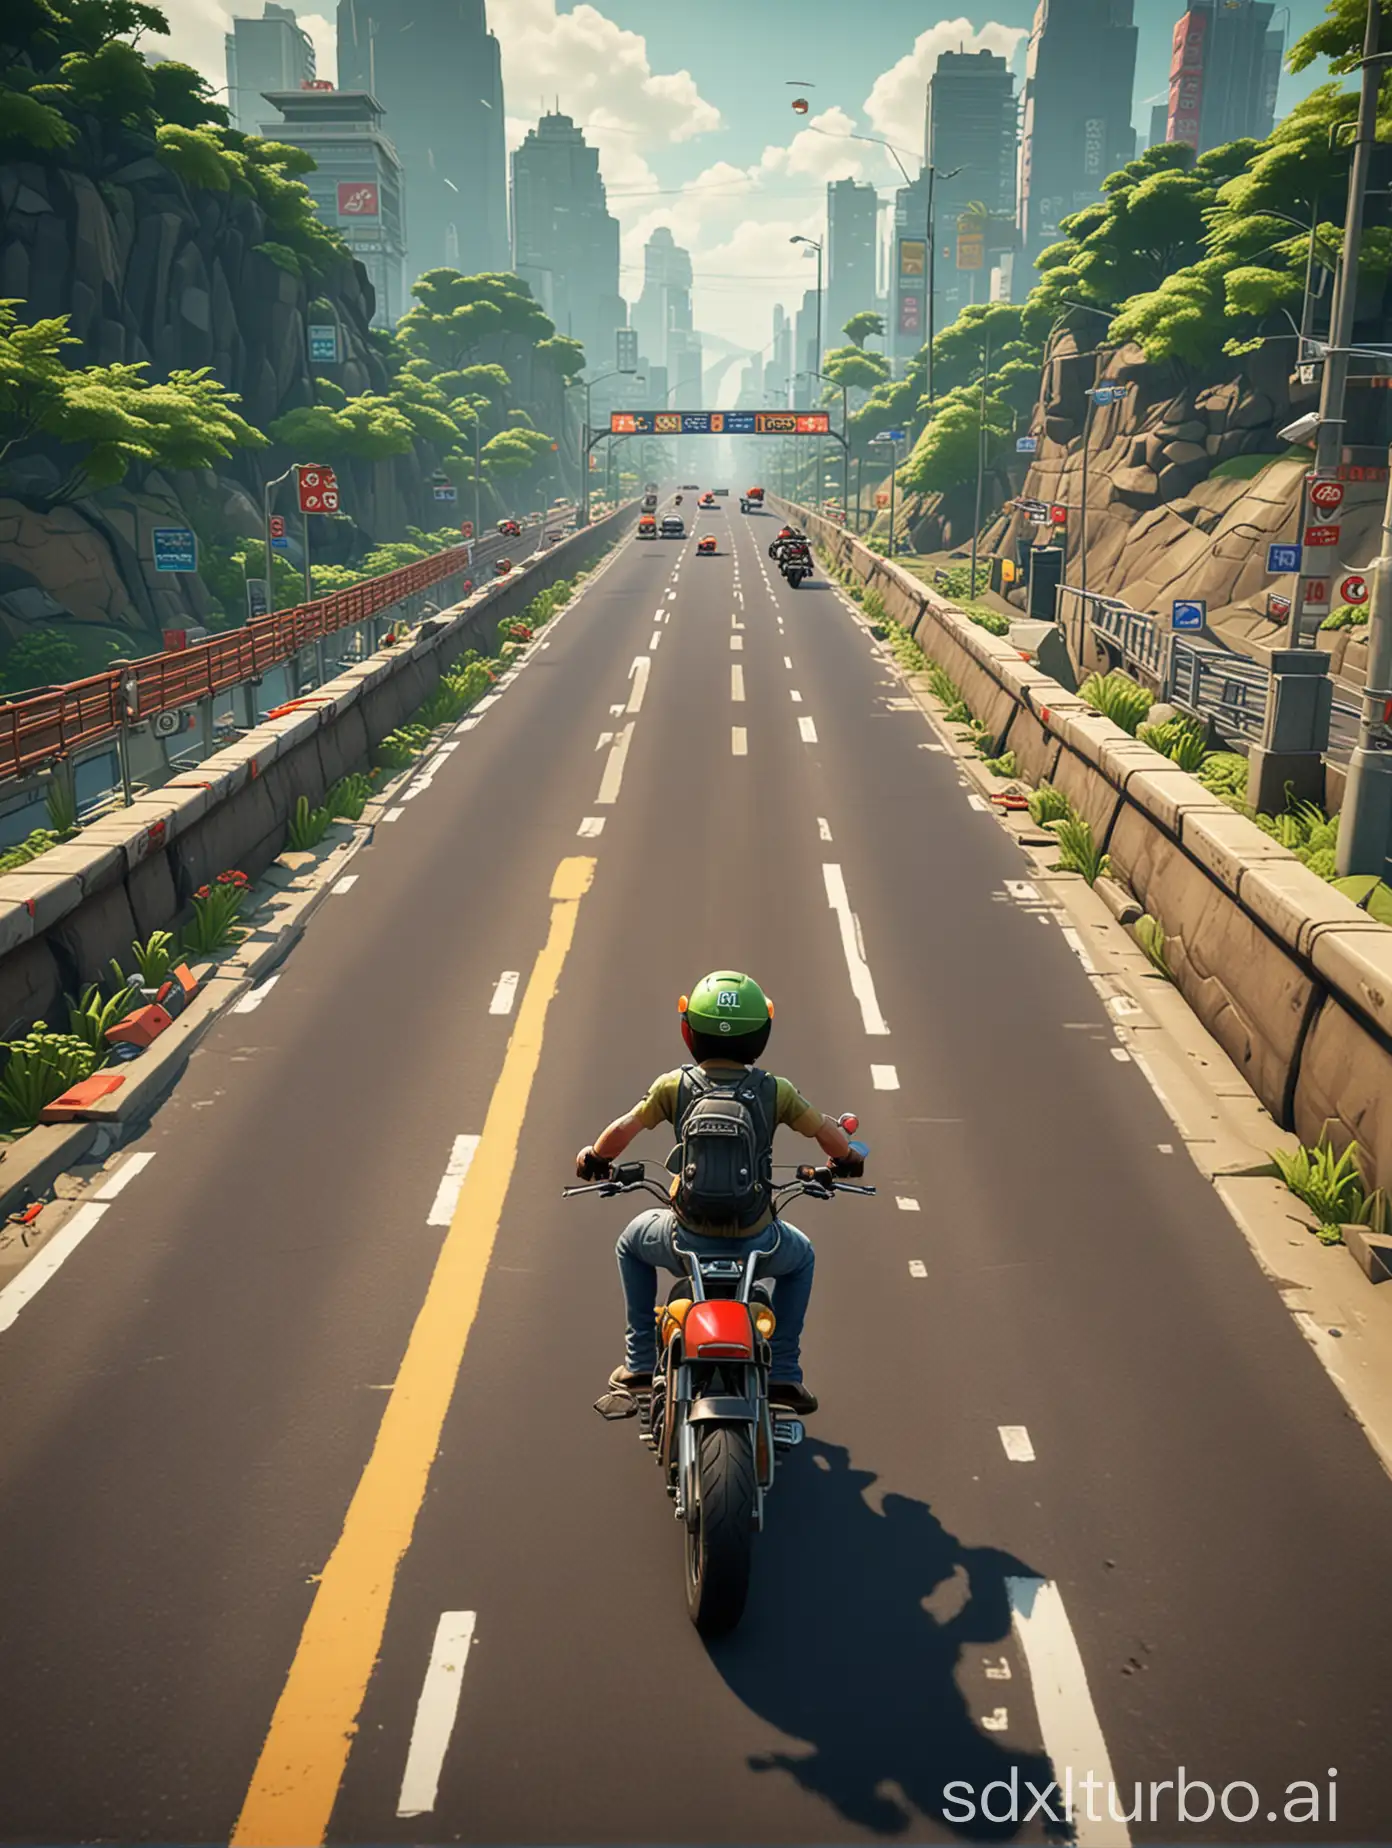 subway surfer gameplay style but with character riding motorcycle on interstate highways with the scene of Taiwan above. Low Poly 3D graphics